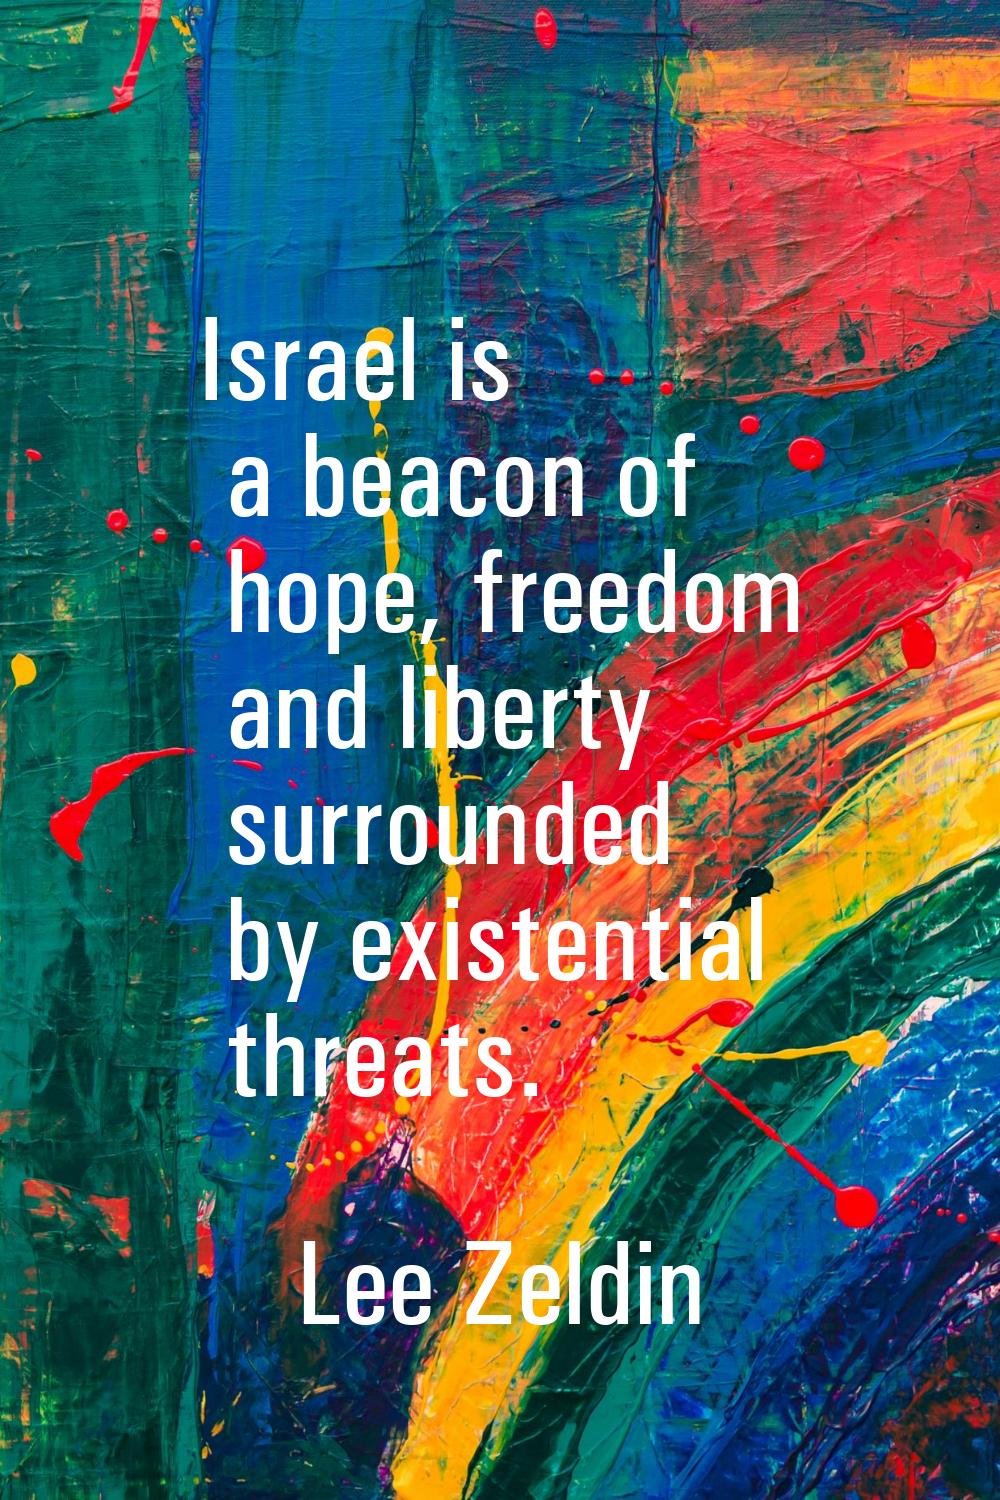 Israel is a beacon of hope, freedom and liberty surrounded by existential threats.